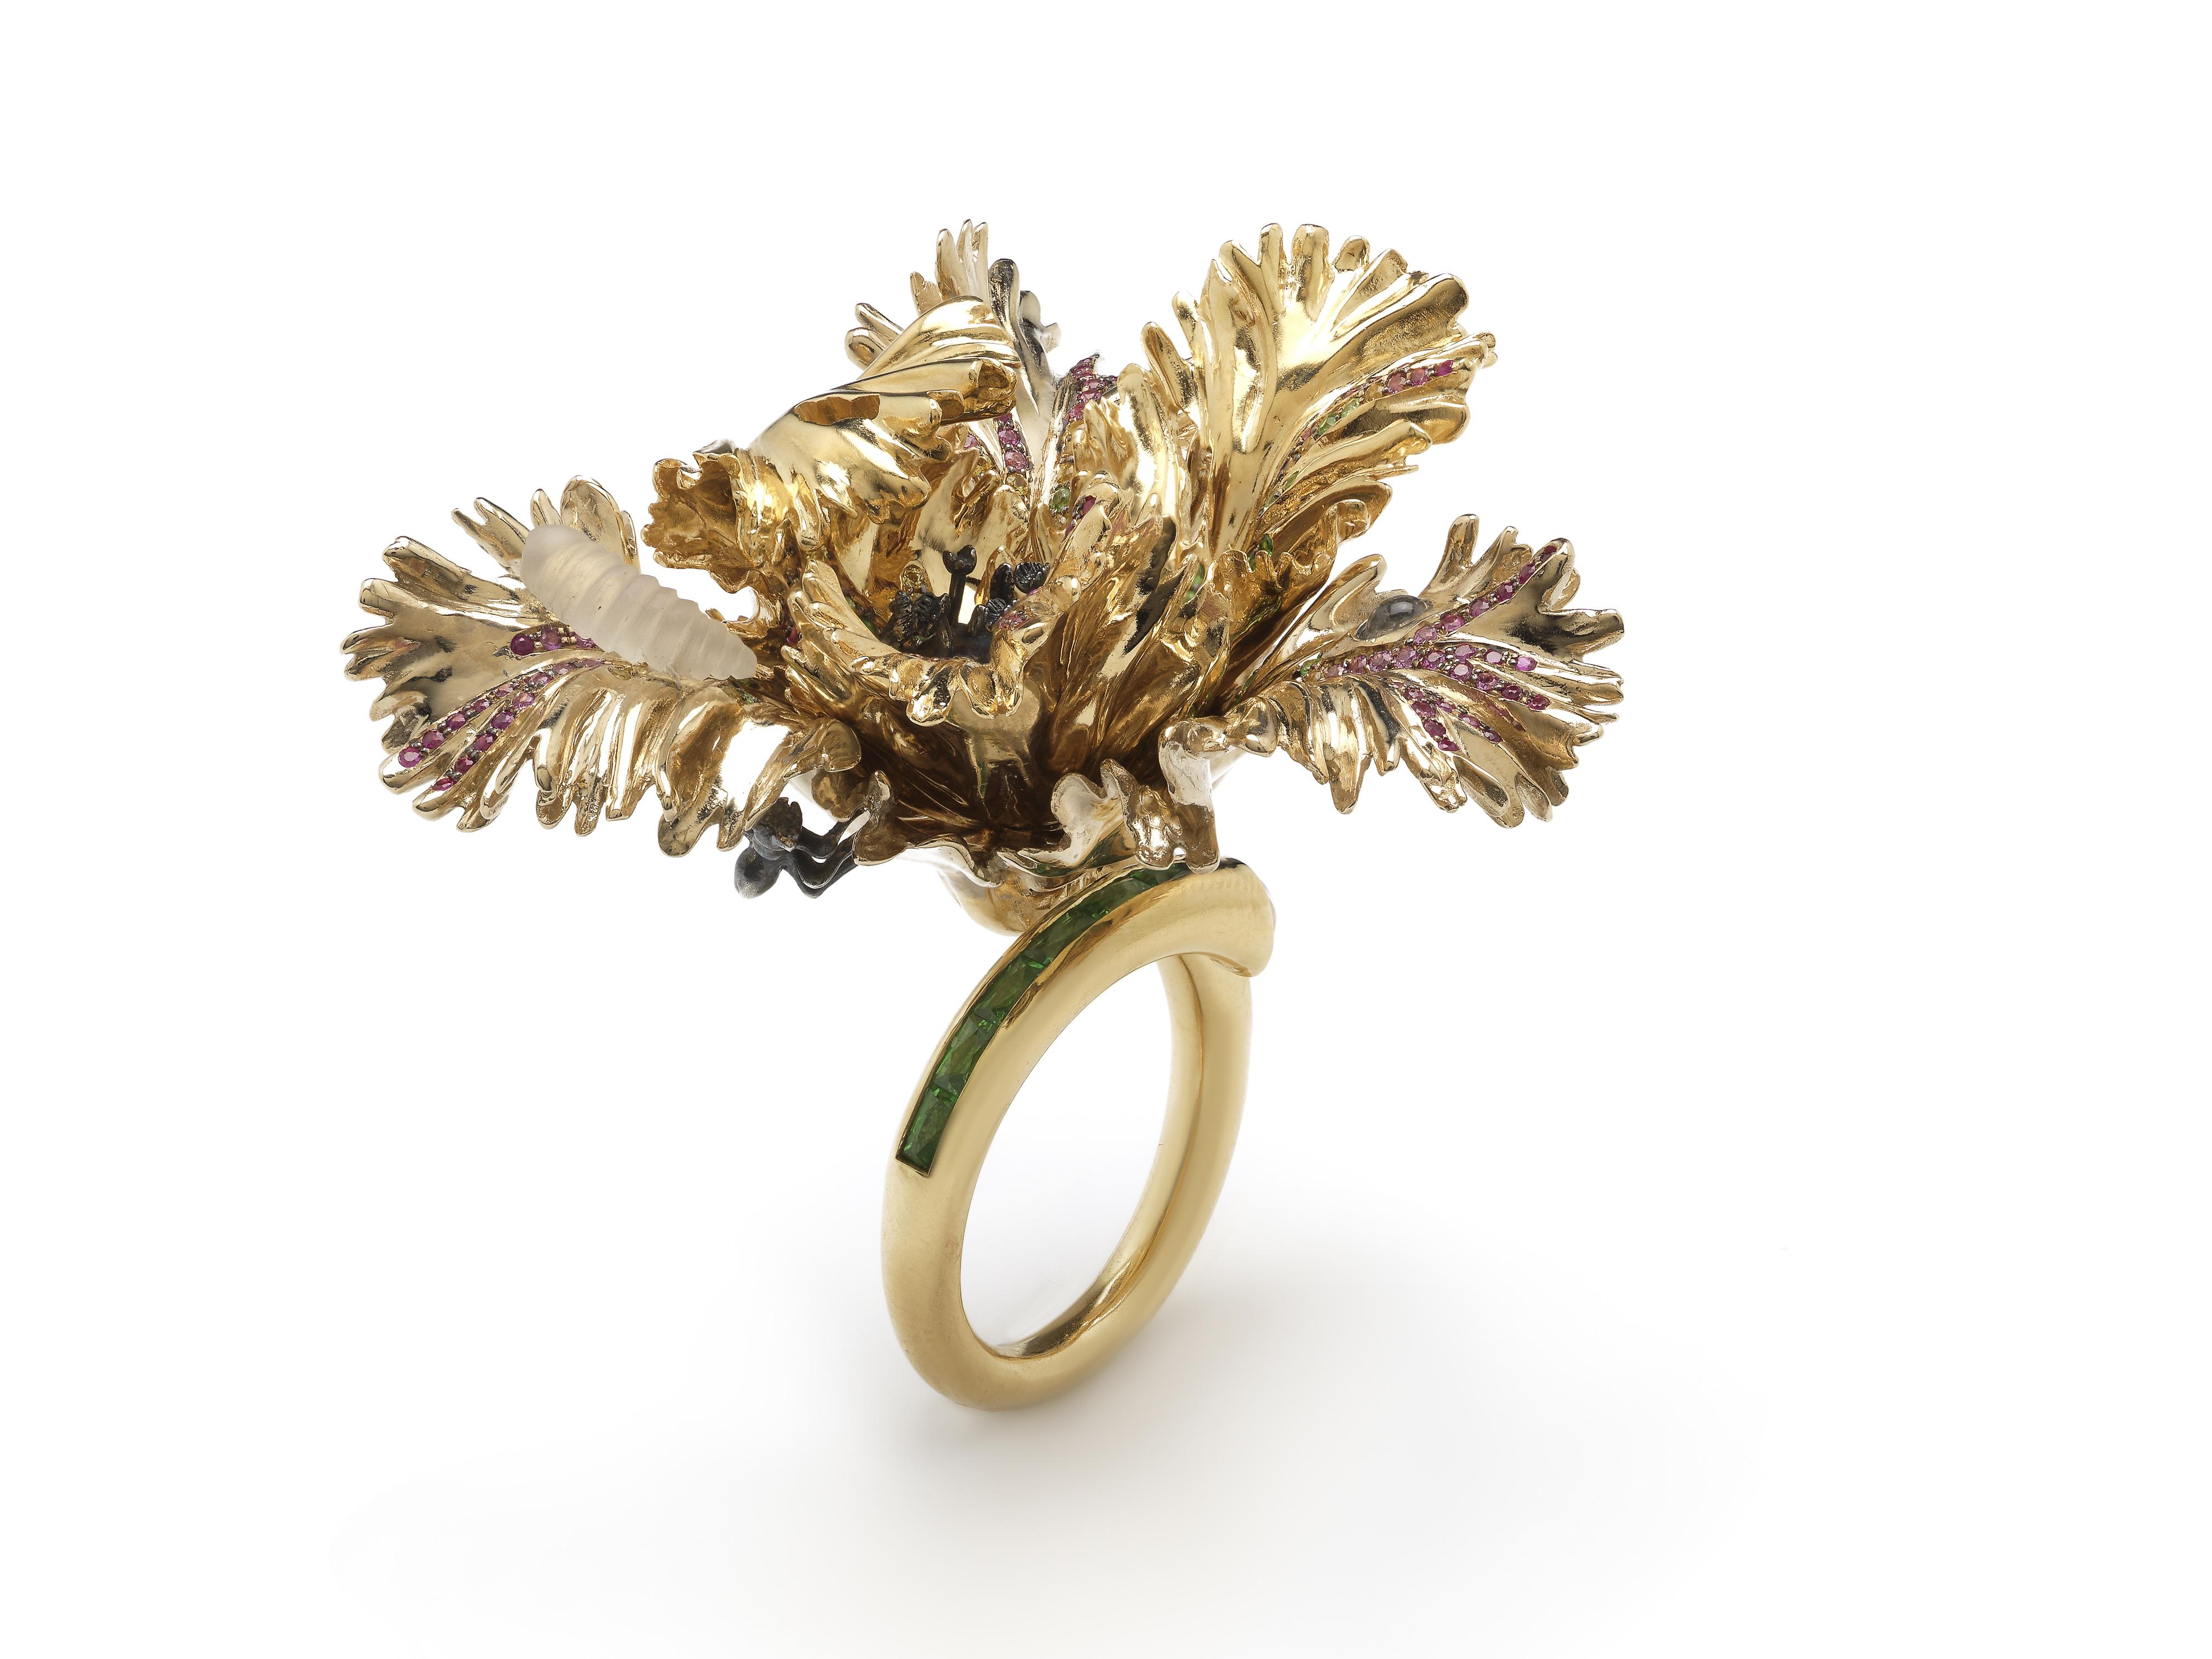 Inspired by the flamboyant beauty of the Parrot Tulip, the Big Tulip Ring blooms on the hand, for a unique take on a cocktail ring.

The ring’s petals are designed in 18k white and yellow gold with blackened gold detailing, and embellished with pink